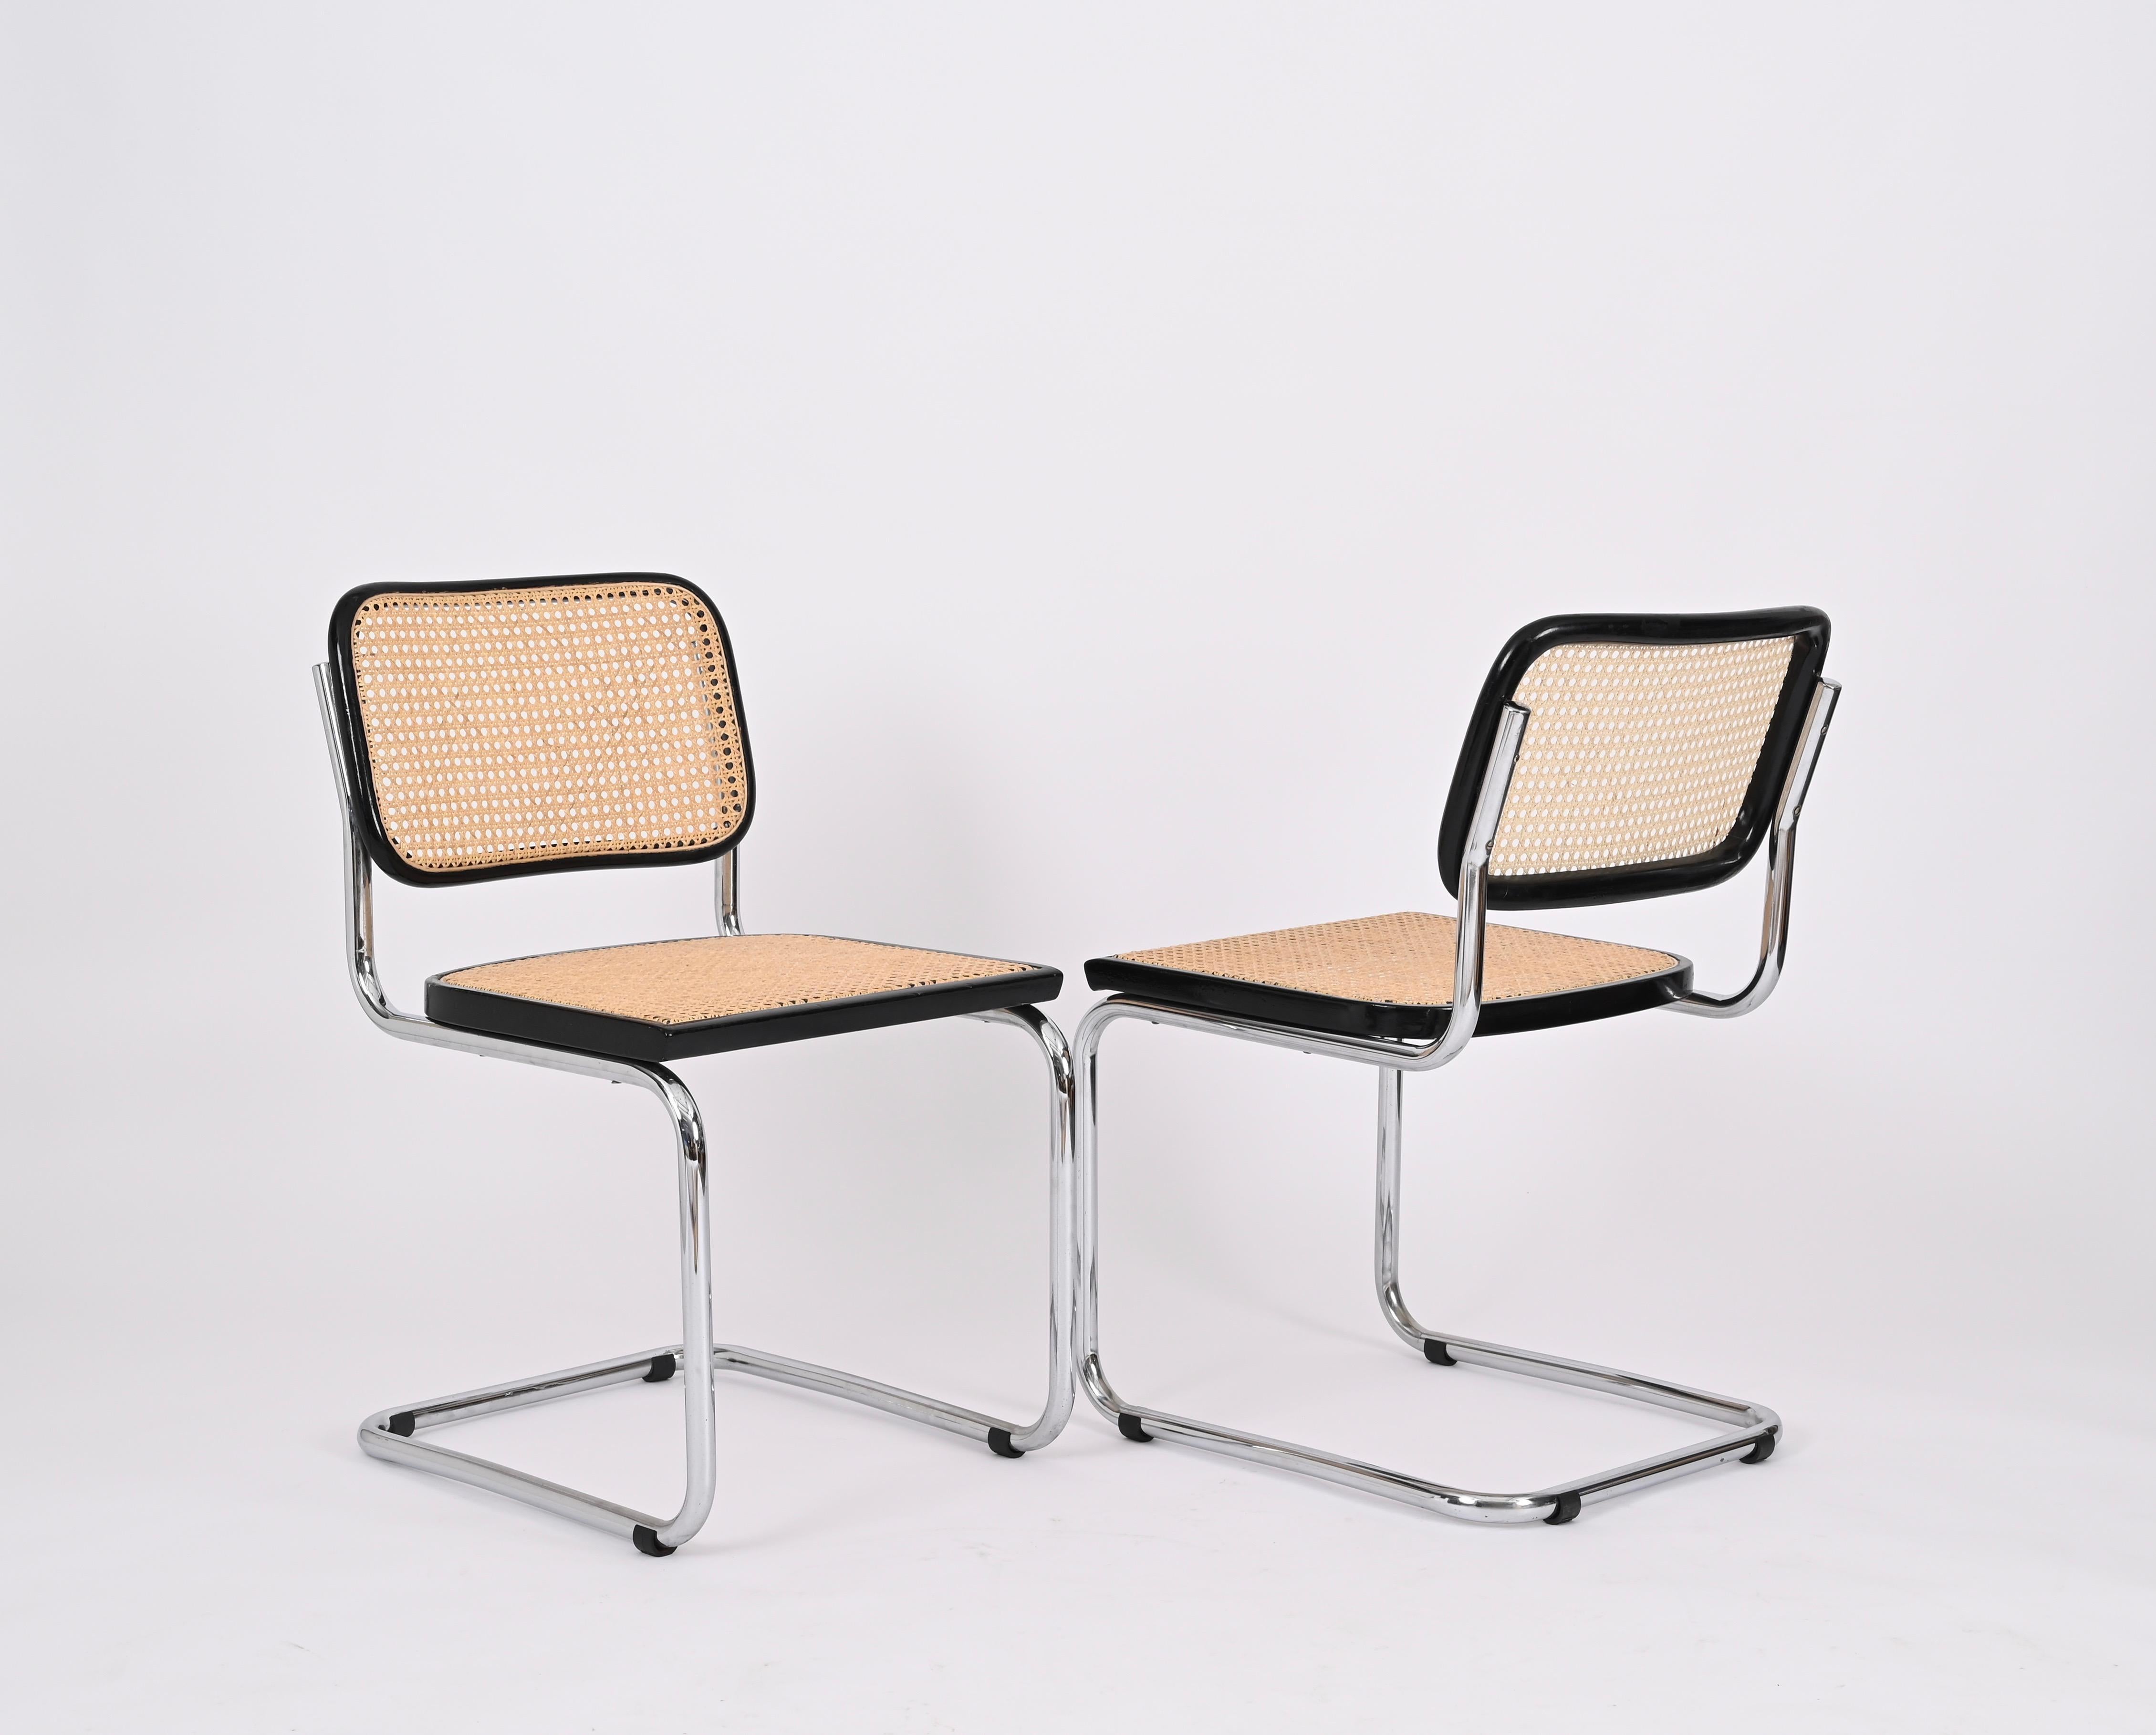 Set of 4 Midcentury Cesca Chairs, Chrome and Straw, by Gavina, Italy 1970s 10